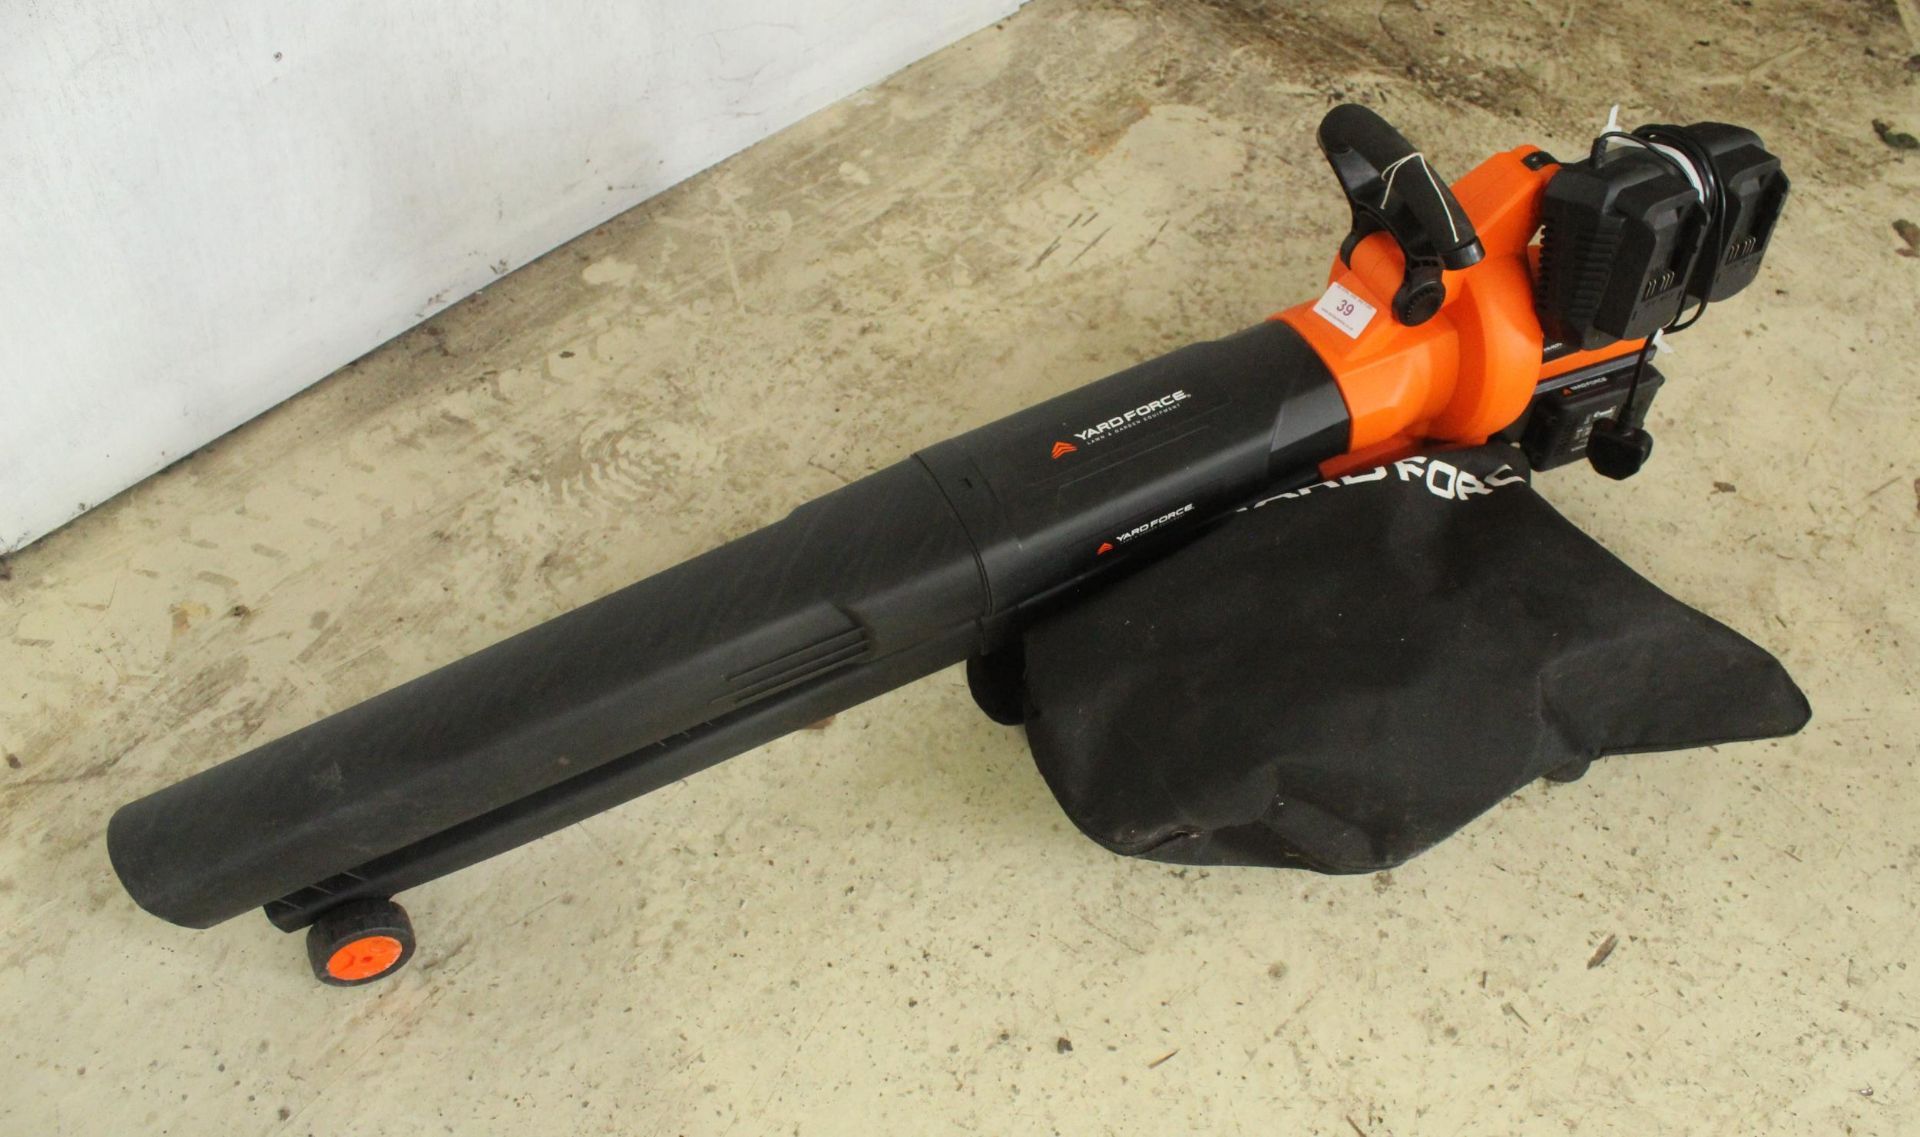 YARDFORCE LEAF BLOWER AND BATTERY CHARGER NO VAT